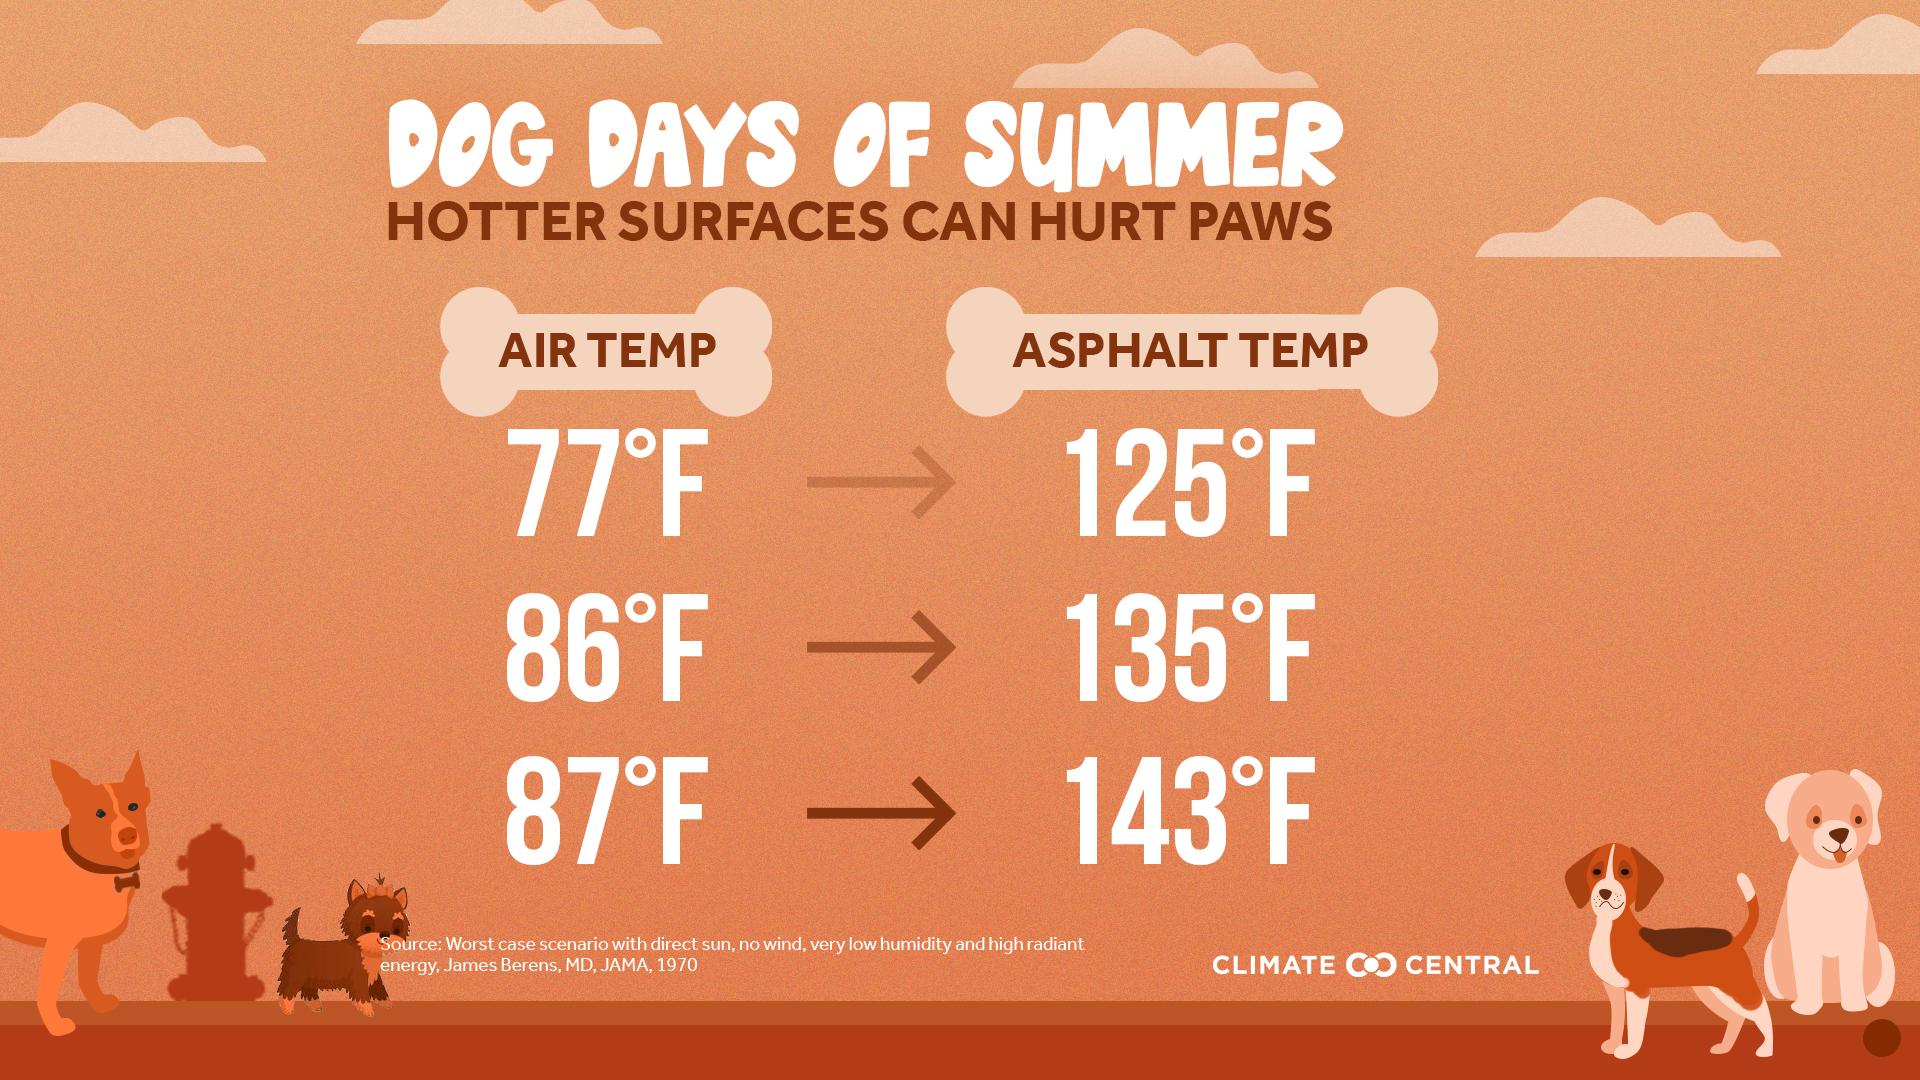 Hot Sufaces Infographic - Dog Days of Summer: When Heat Endangers Pets